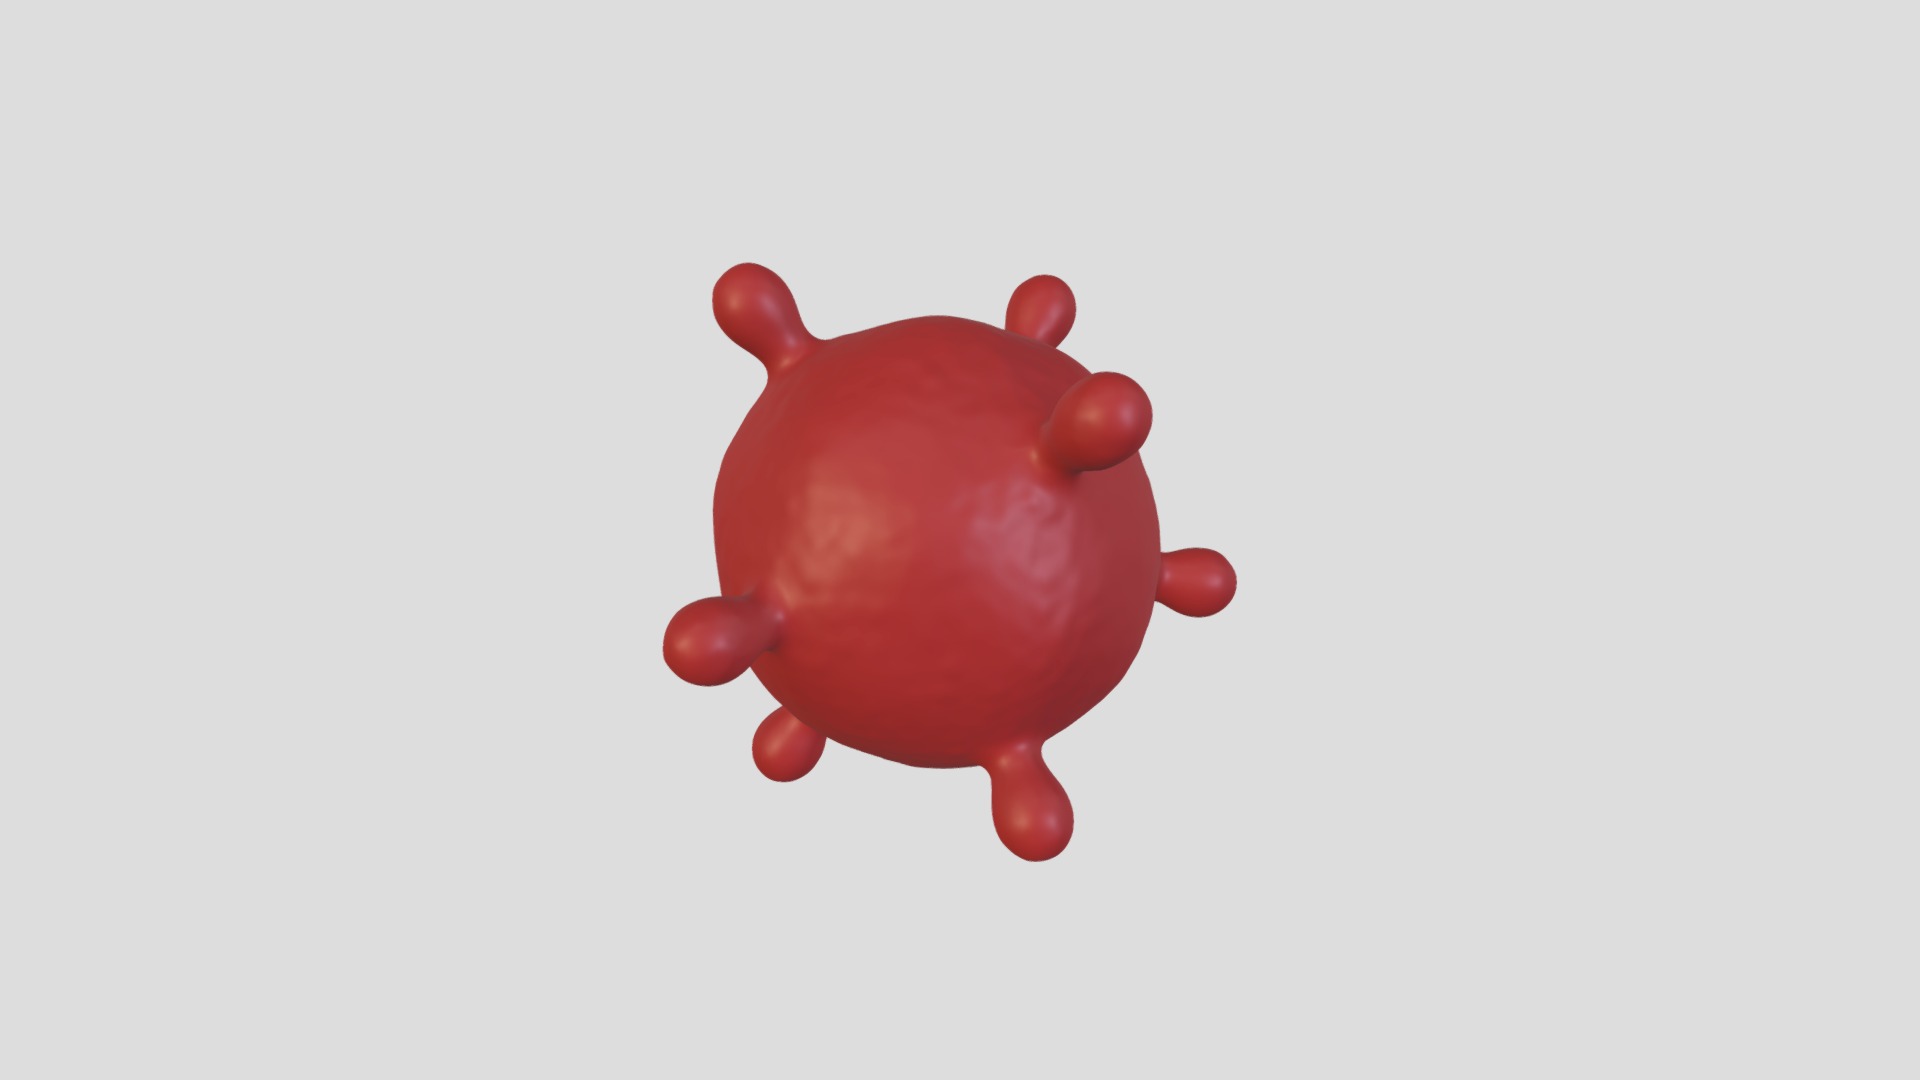 3D model Virus - This is a 3D model of the Virus. The 3D model is about a red toy on a white background.